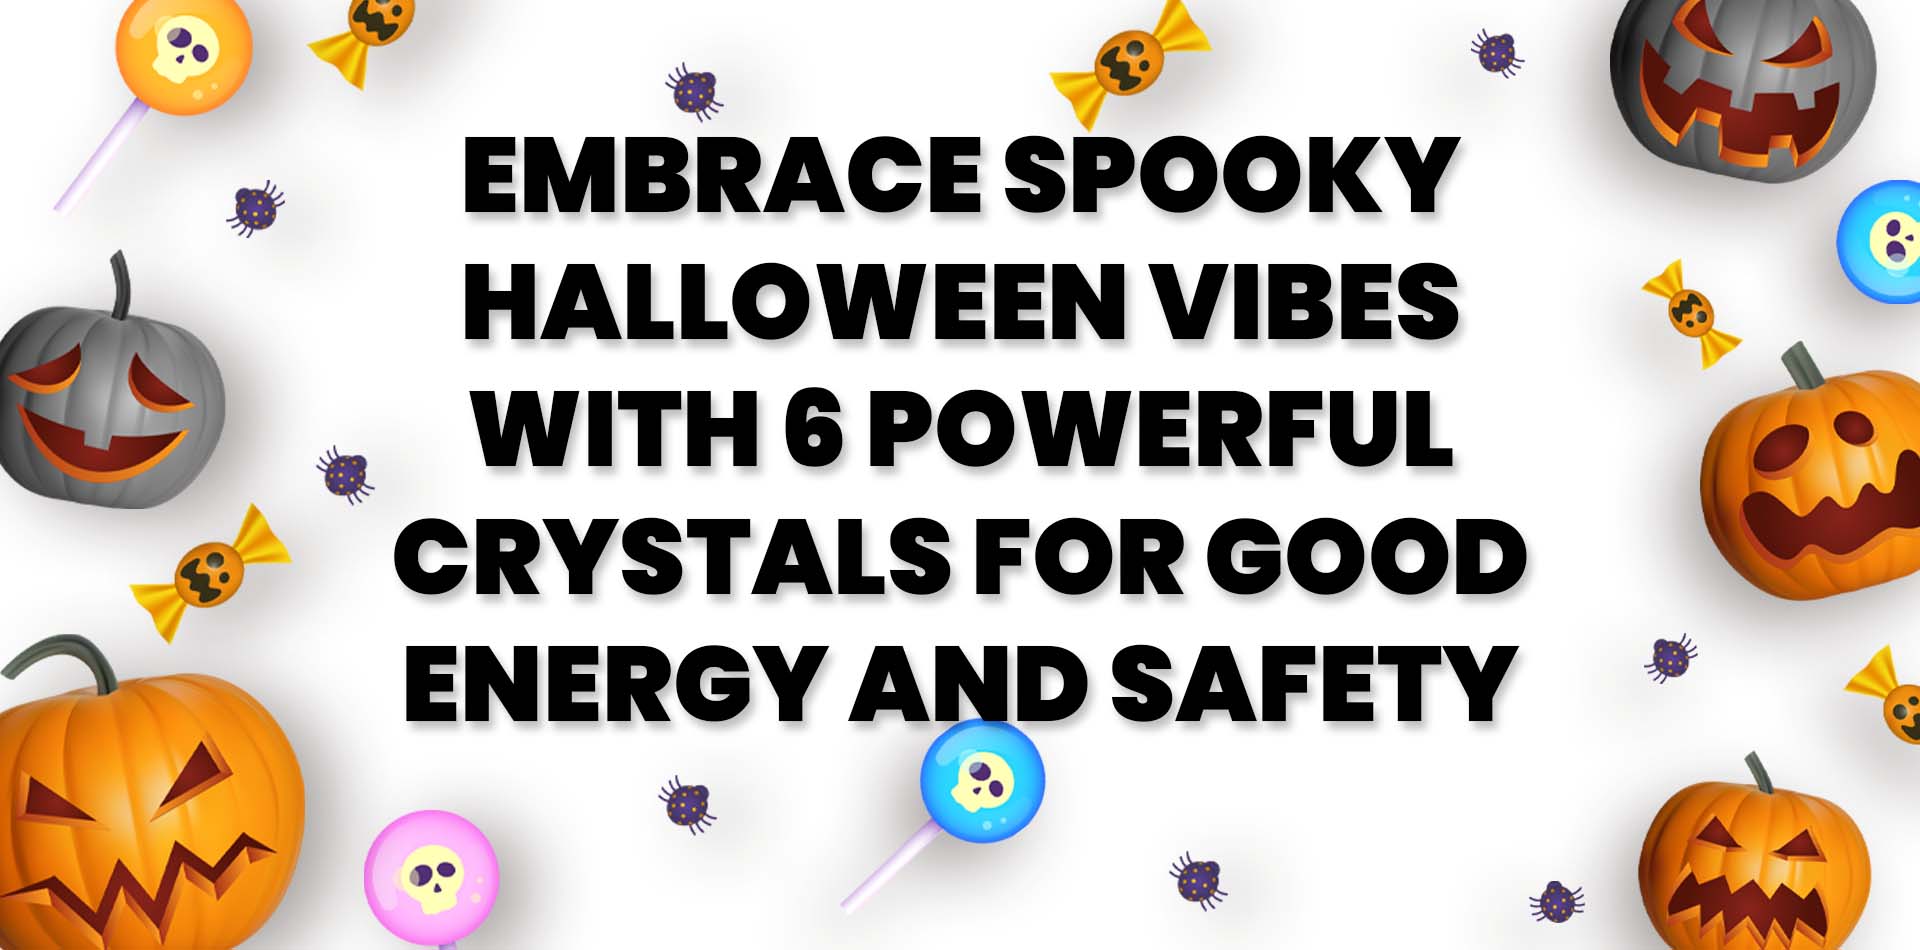 Embrace Spooky Halloween Vibes with 6 Powerful Crystals for Good Energy and Safety